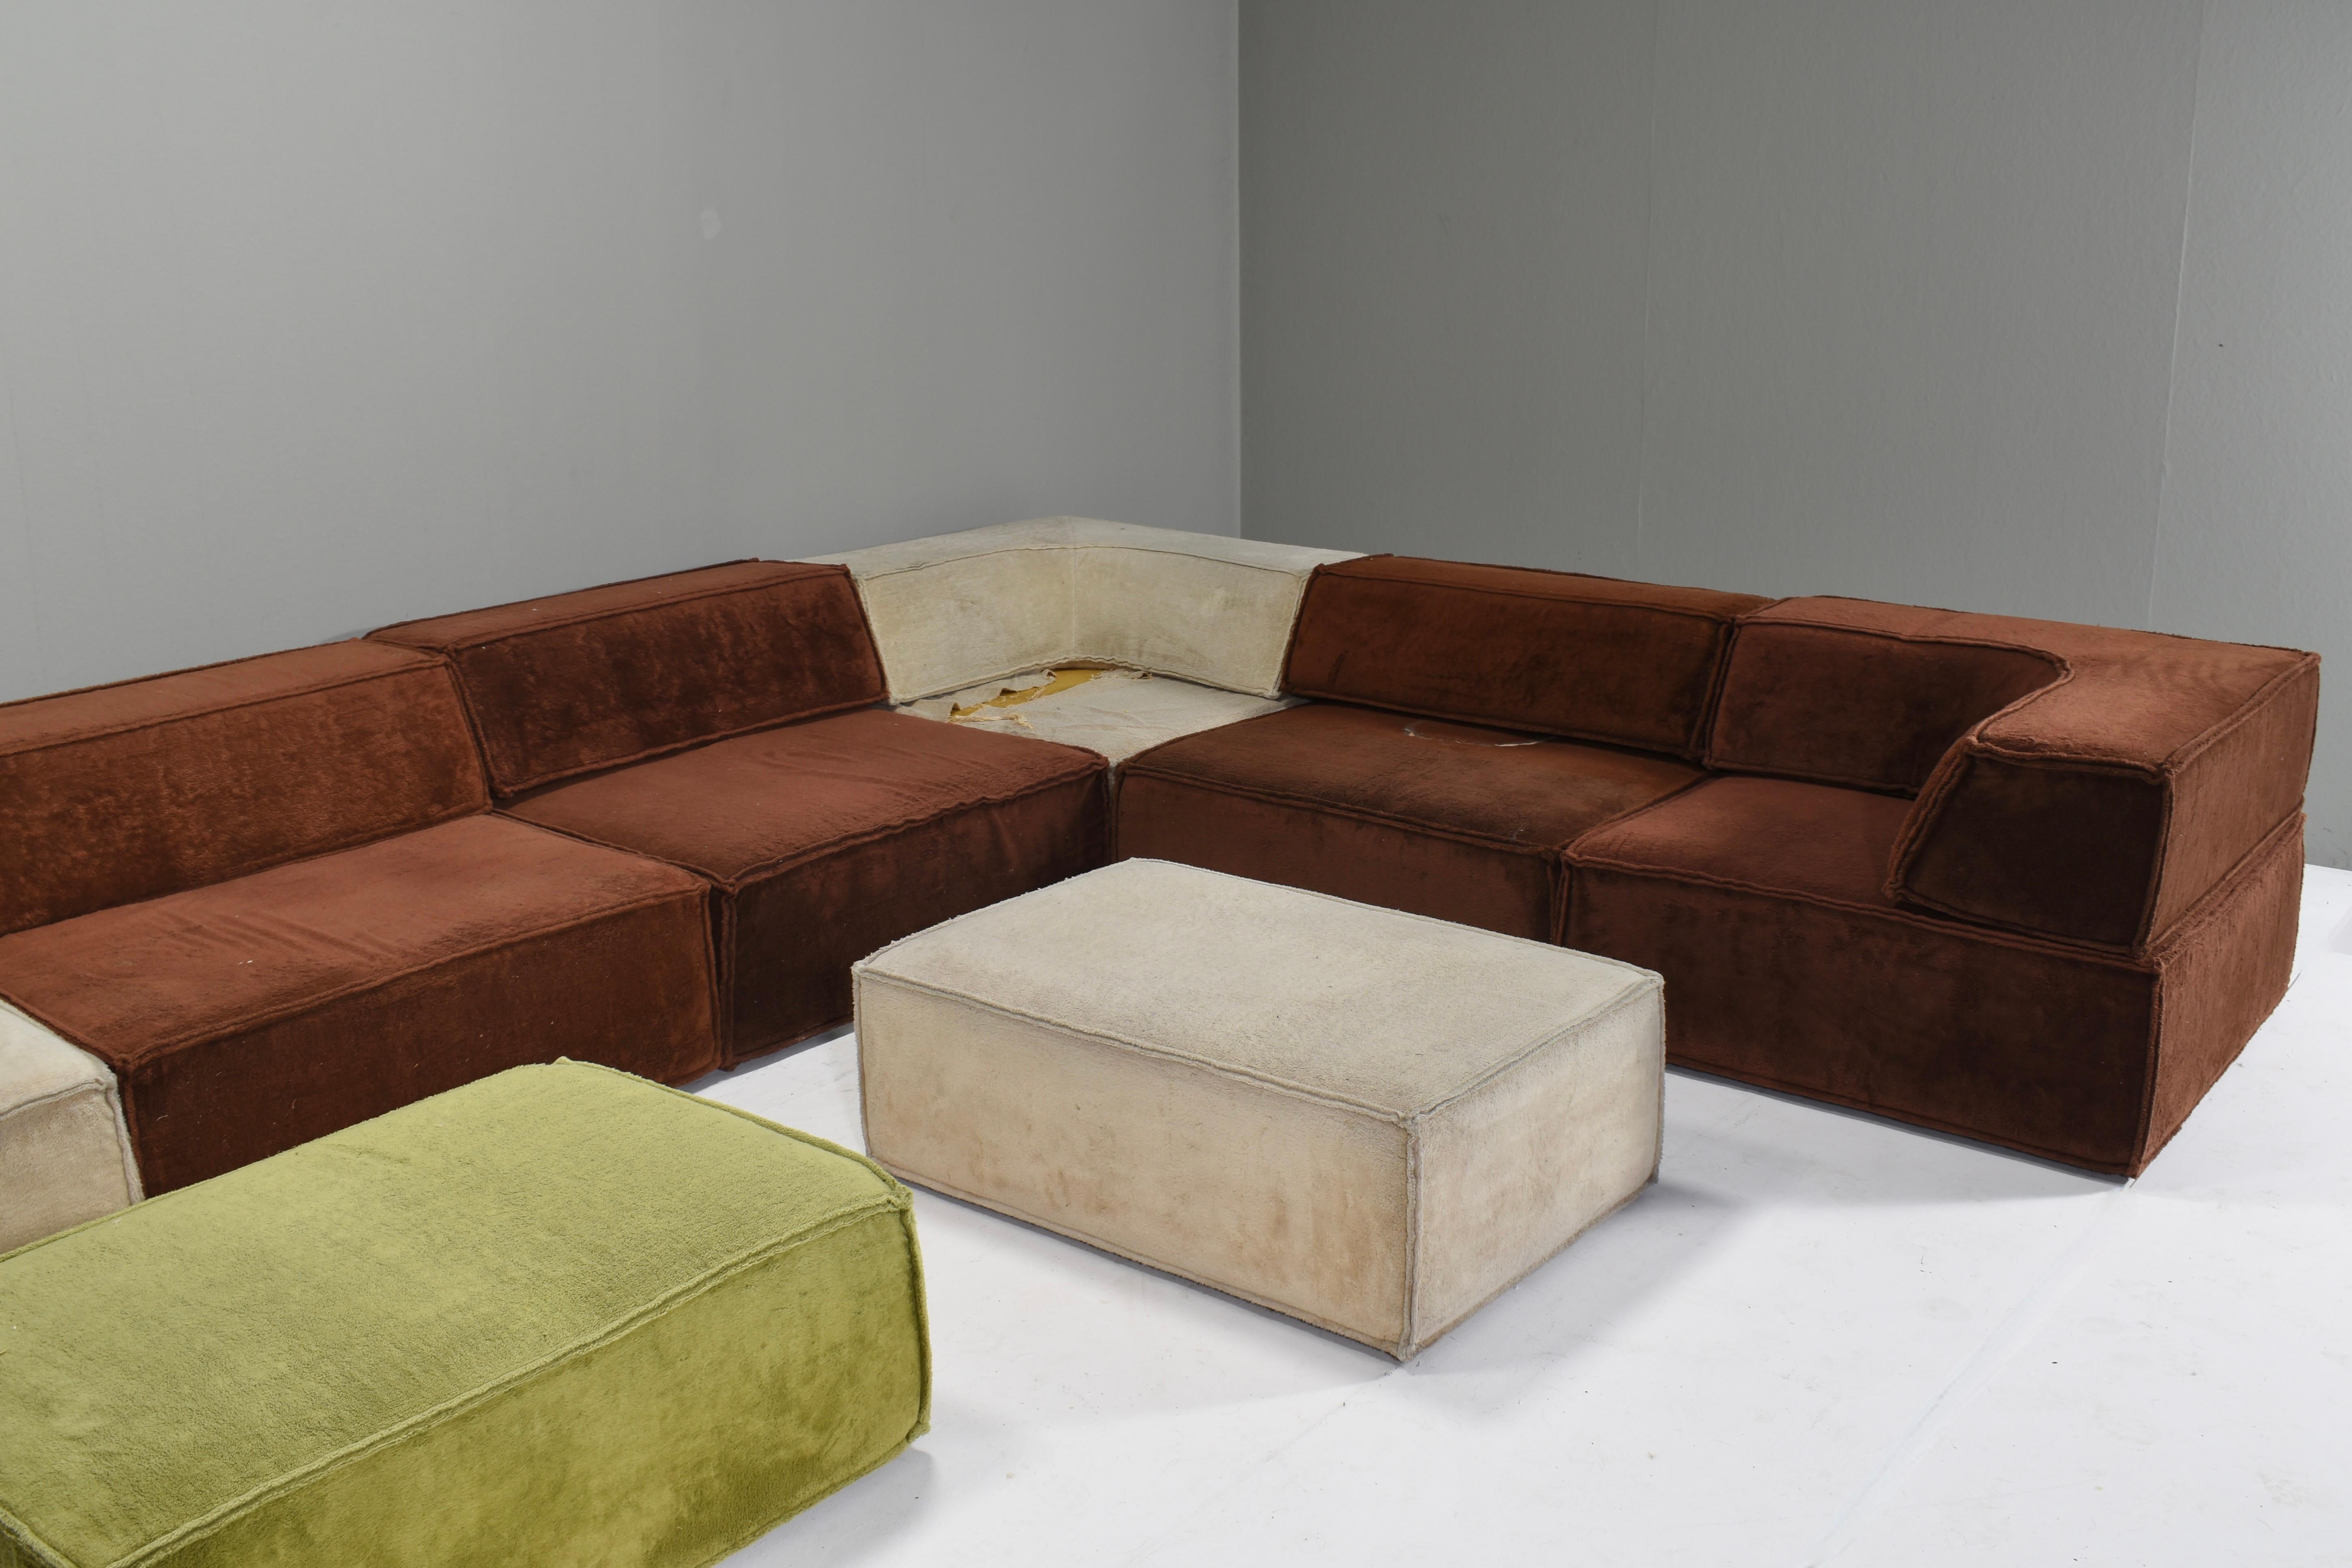 Fabric XXL COR Trio Sectional Sofa, Germany / Switzerland, 1972  NEEDS NEW UPHOLSTERY For Sale